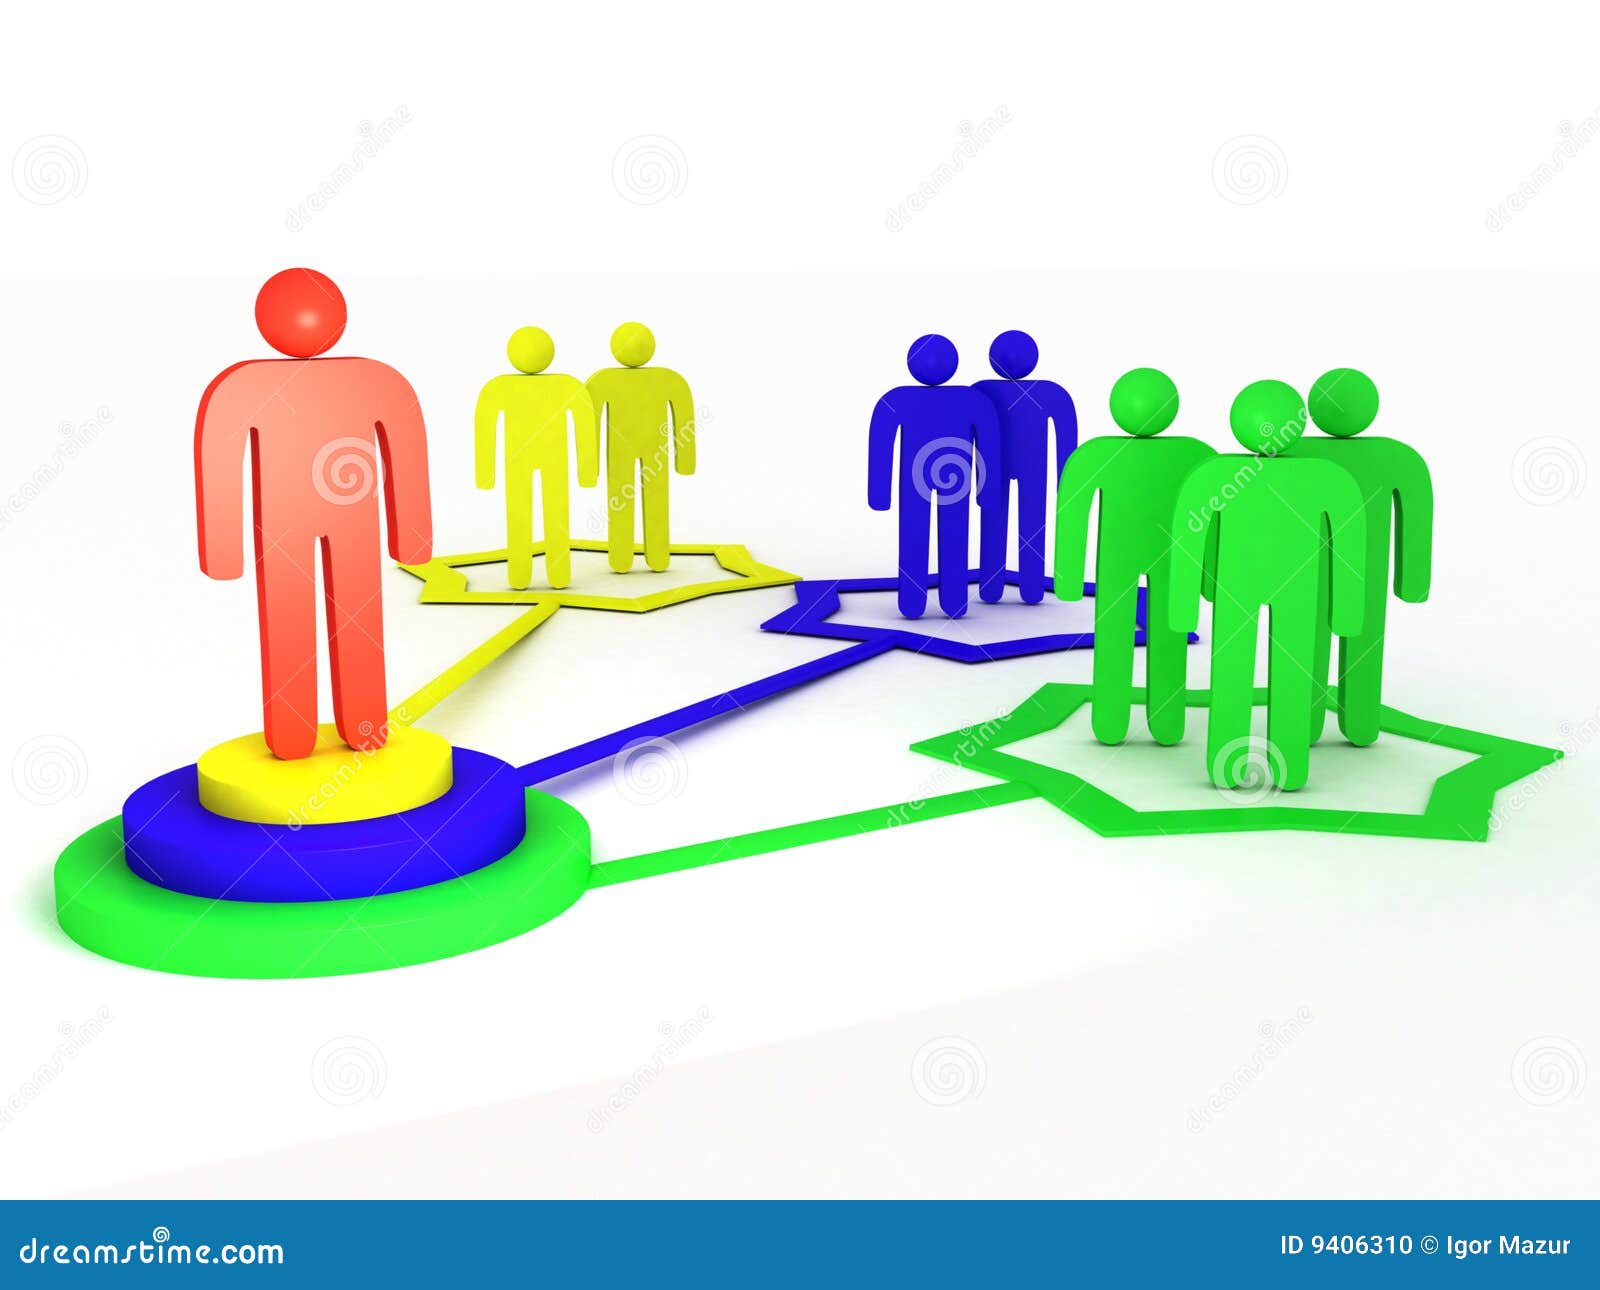 network pictures clip art - photo #49